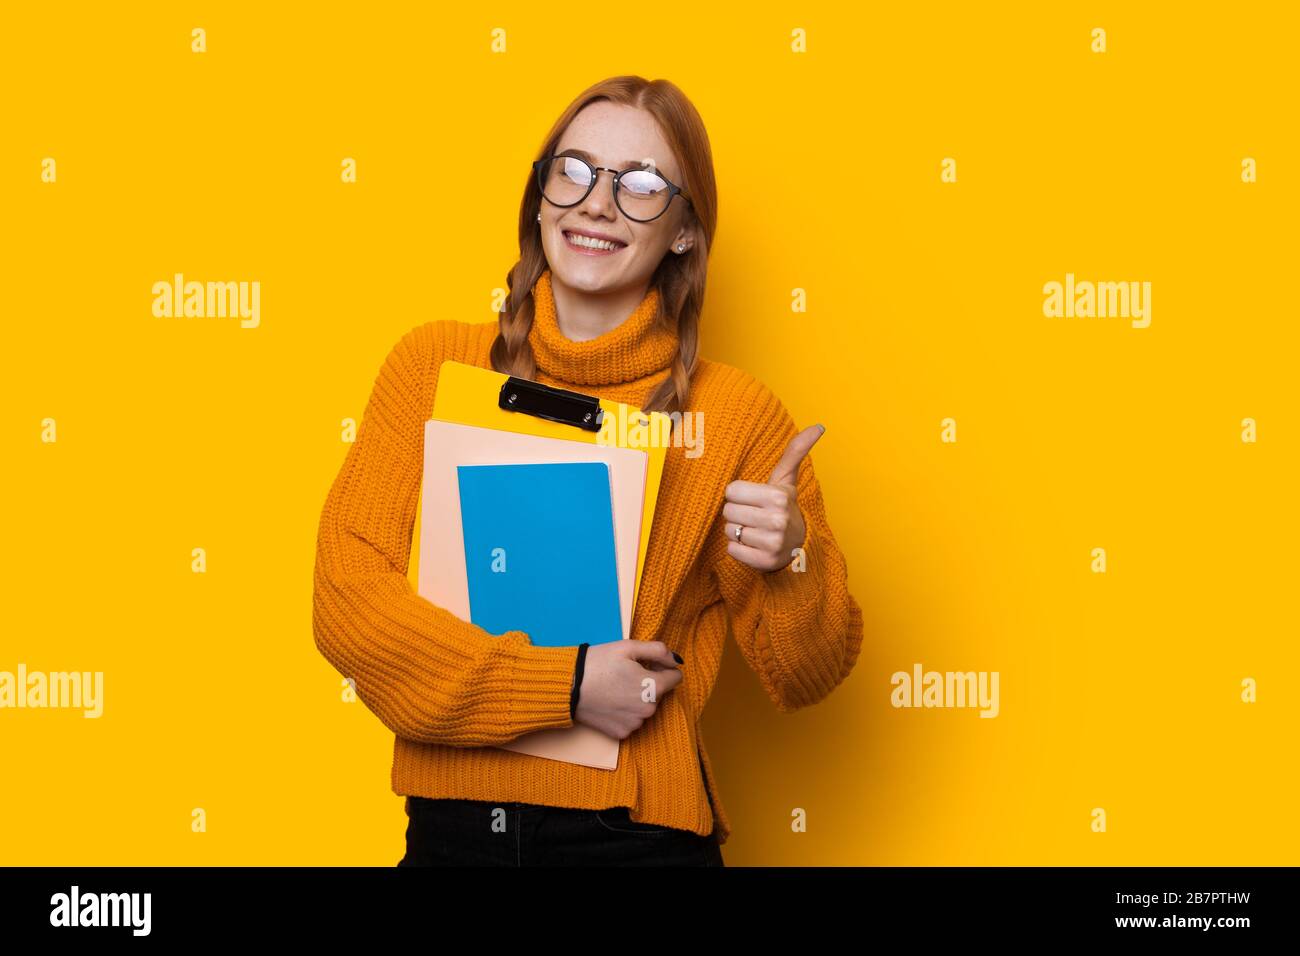 Happy red haired caucasian student with freckles and eyeglasses is holding some books and gesturing the like sign on a yellow background Stock Photo